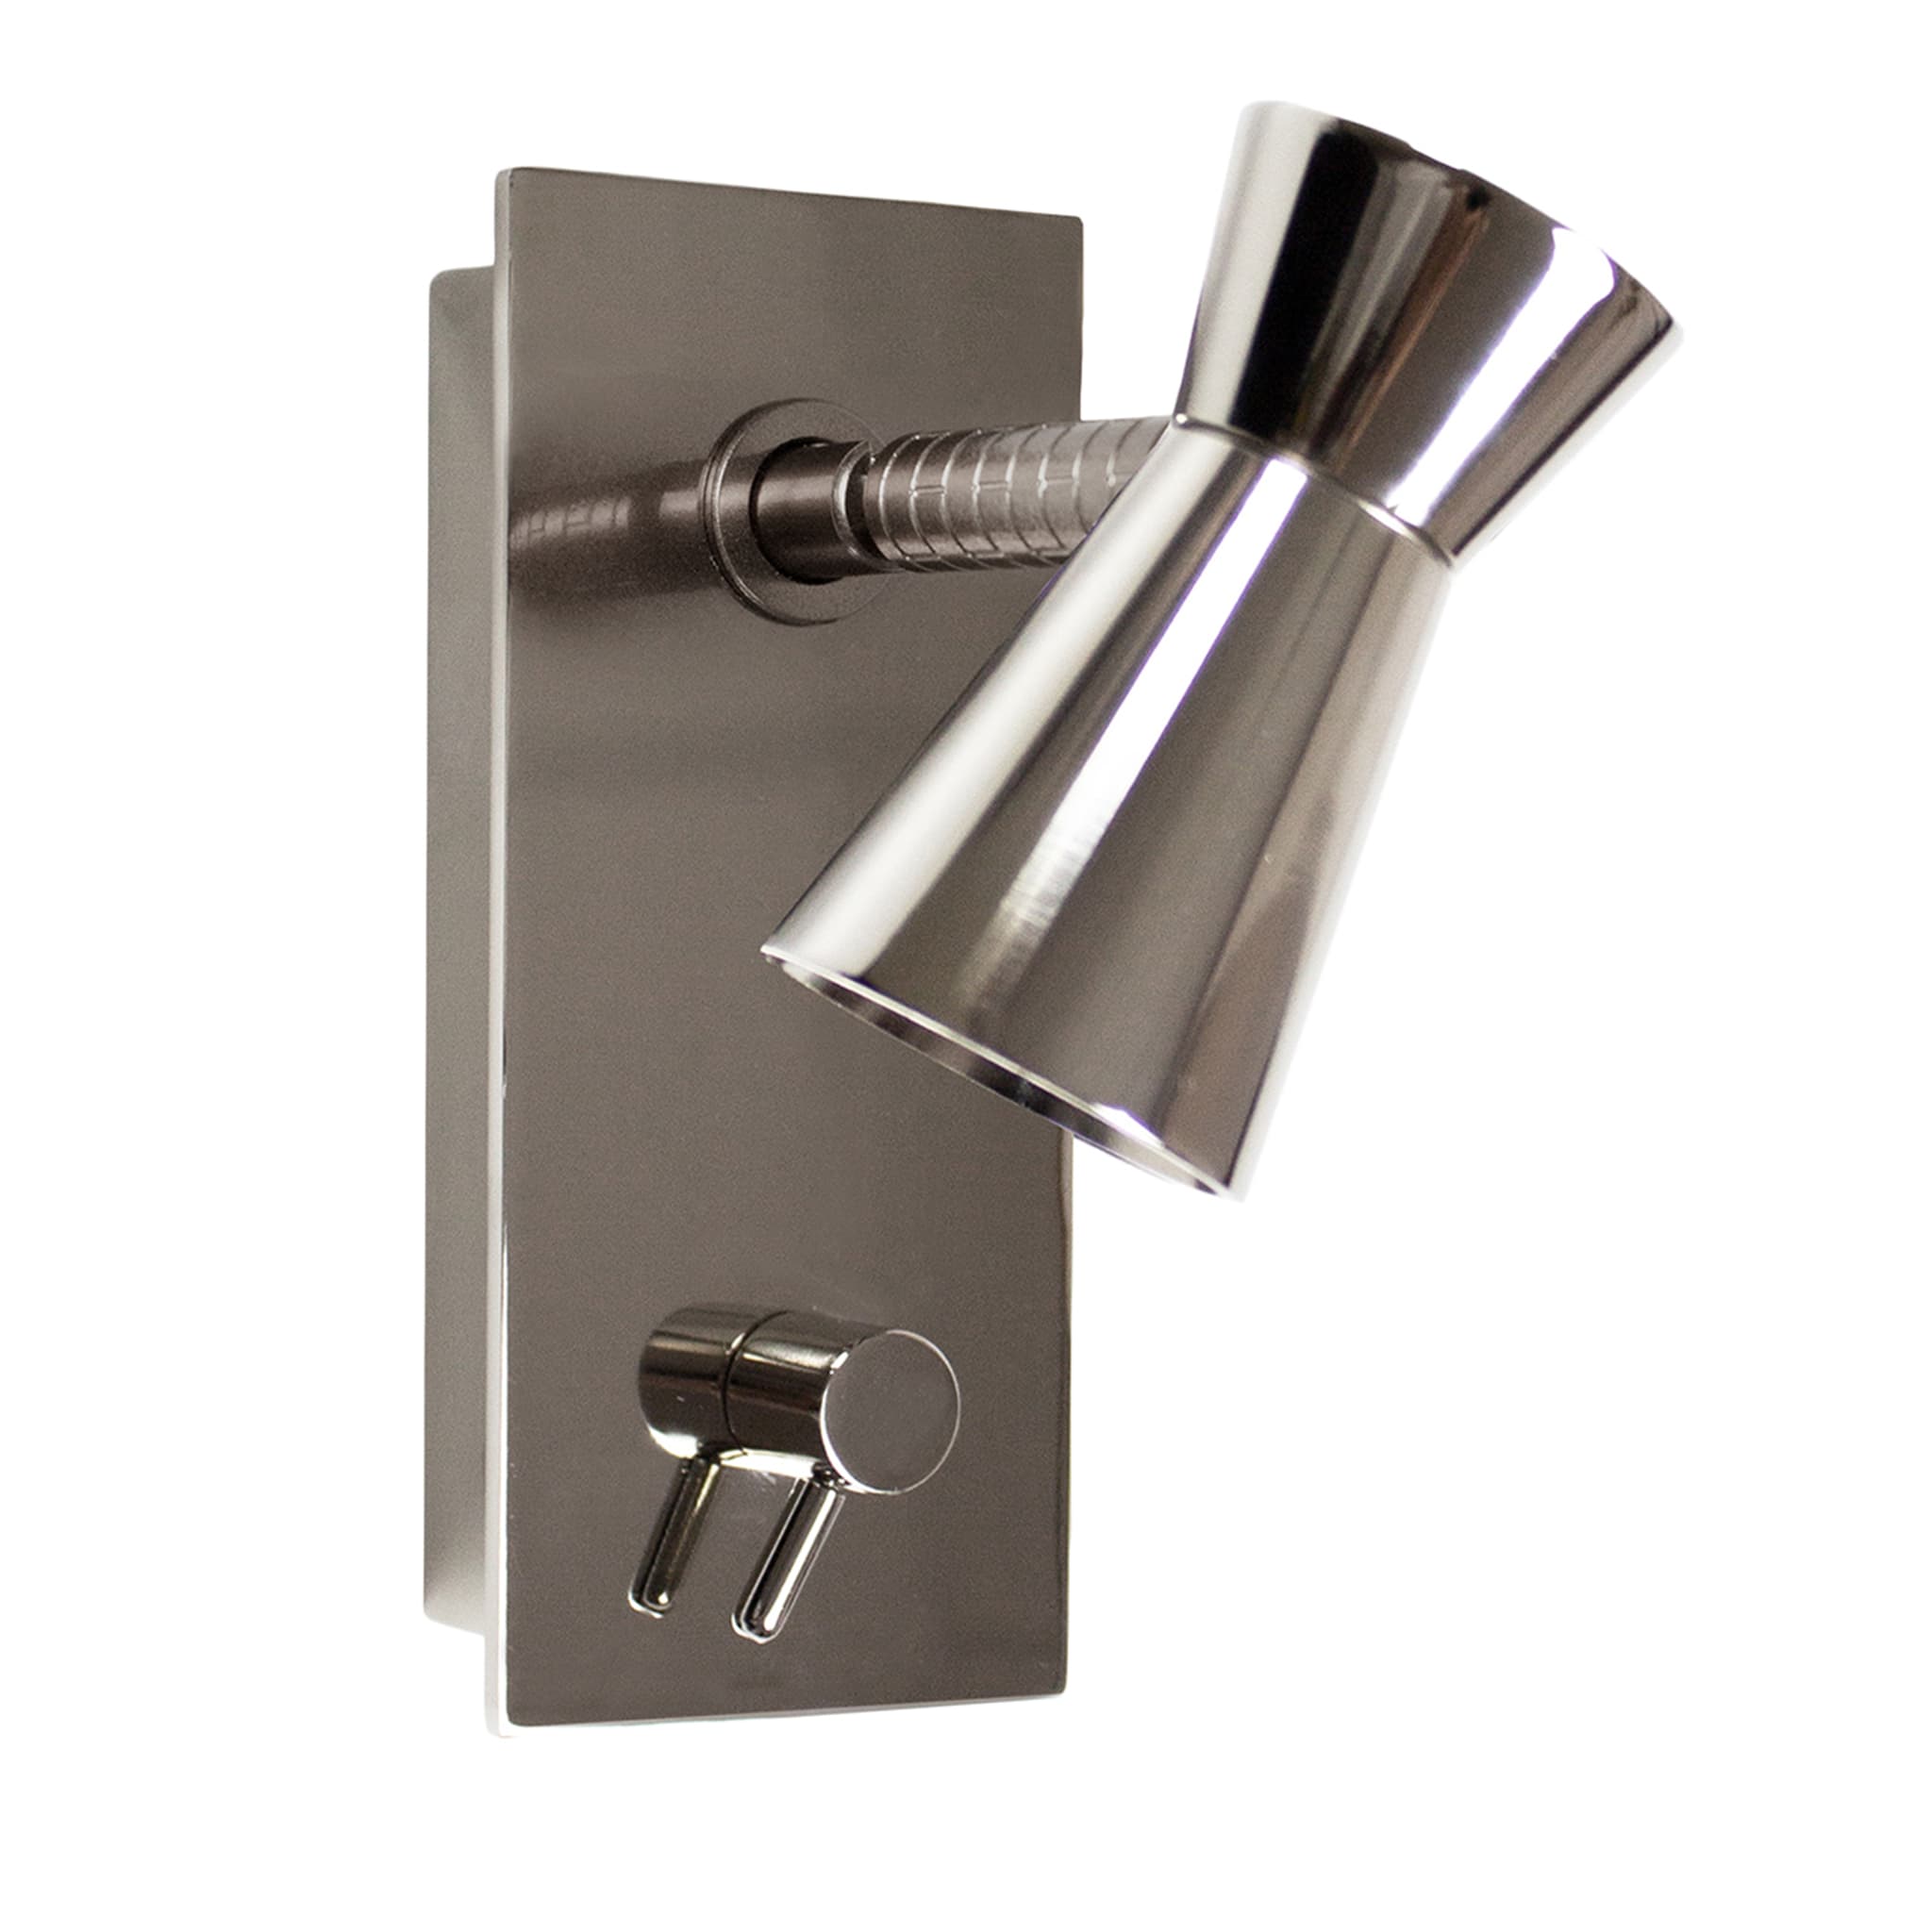 G+T Glossy Nickel Sconce with Leather Insert - Main view